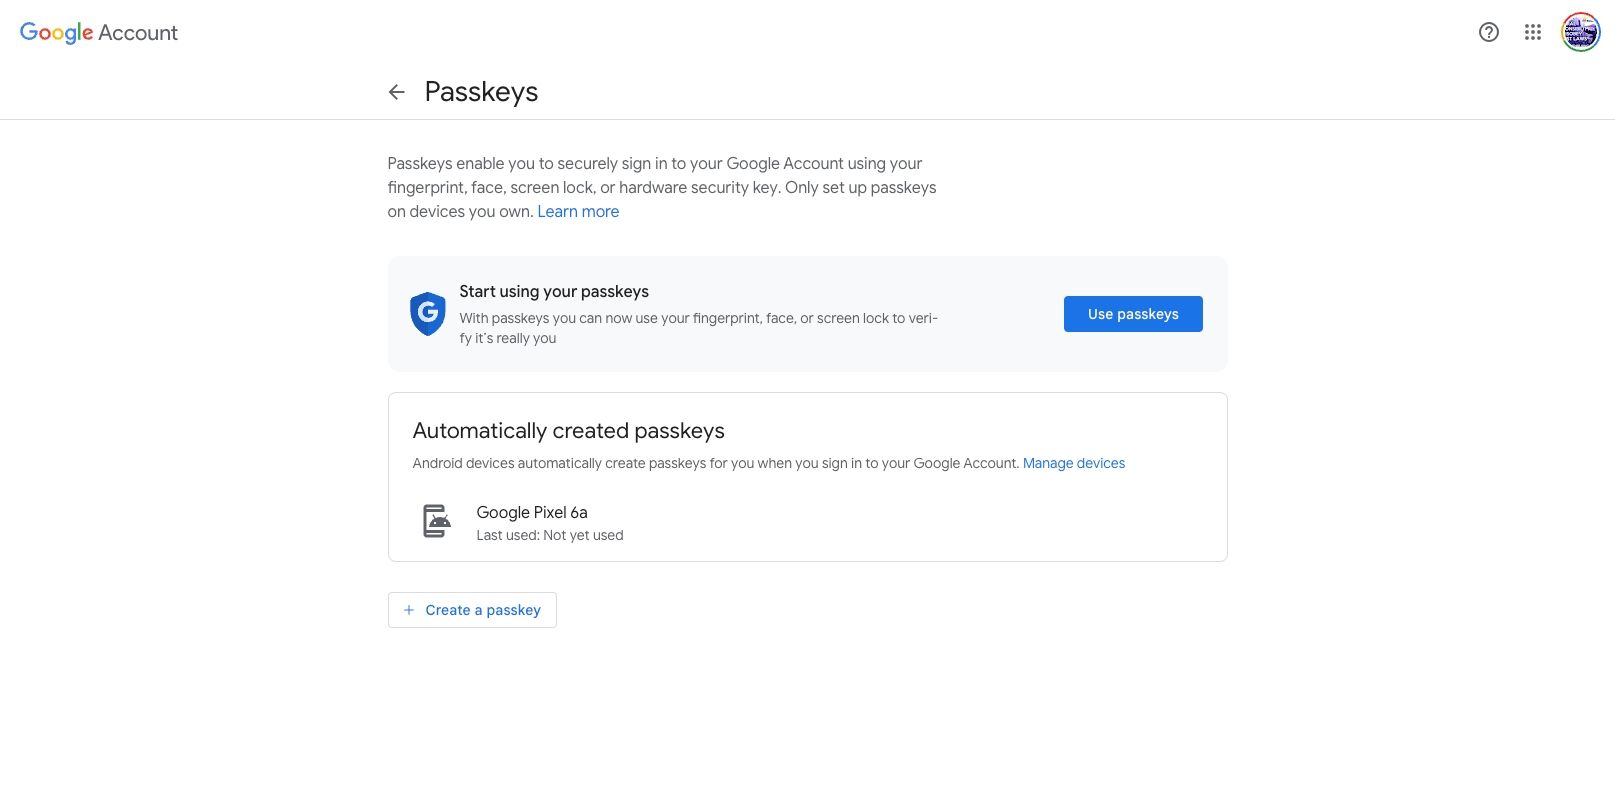 Use passkeys option in Google security settings